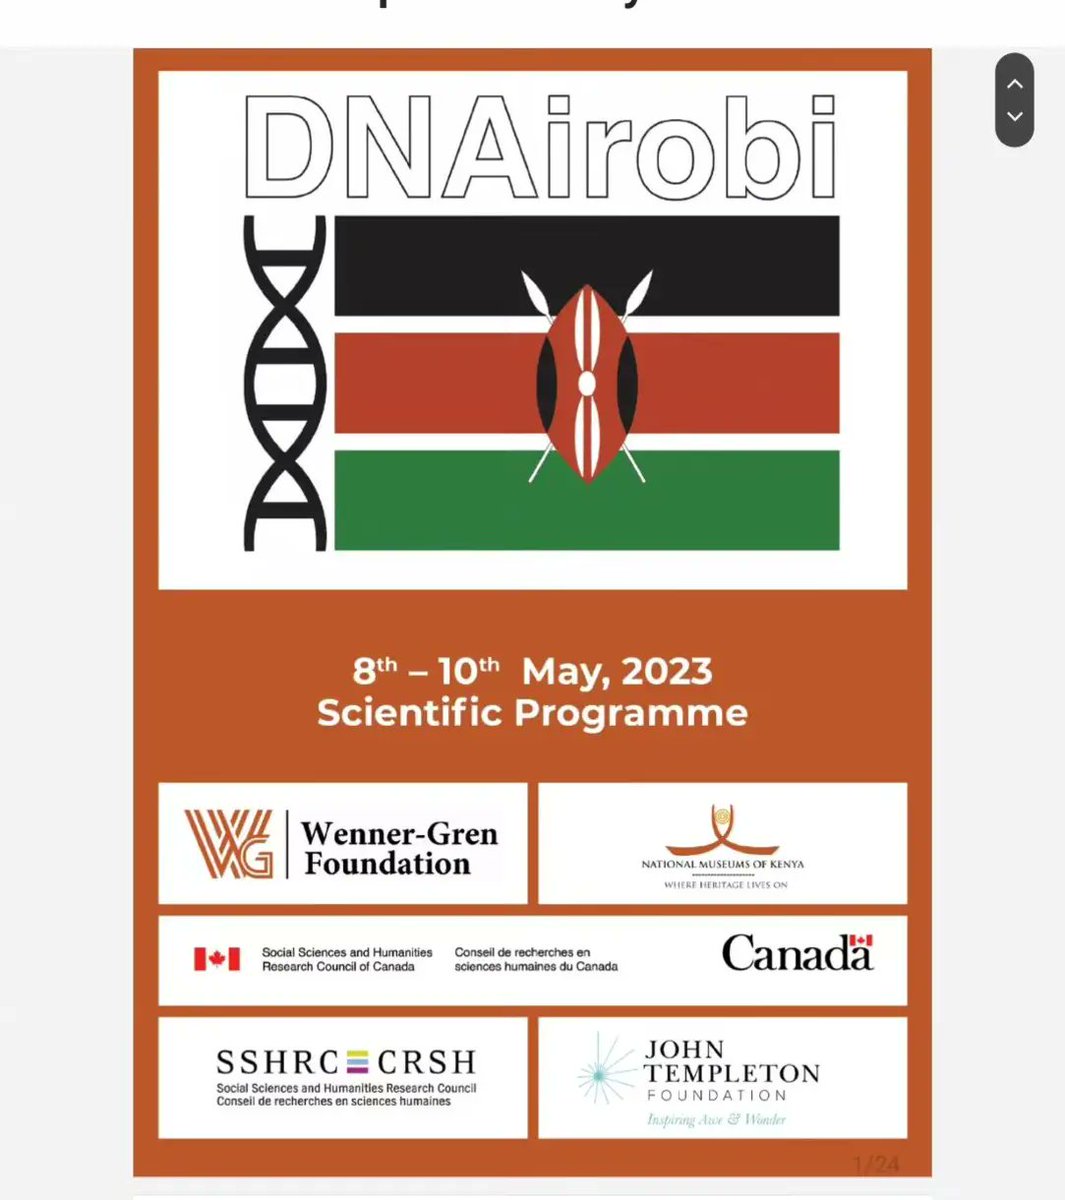 Everyday @museumsofkenya I earn a Pea hD in something at the Museum. This week, its extraction of DnA sequences from fossils...but they aren't calling them fossils, they are being specifically termed as 'ancient remains'.

#HeritageEducation